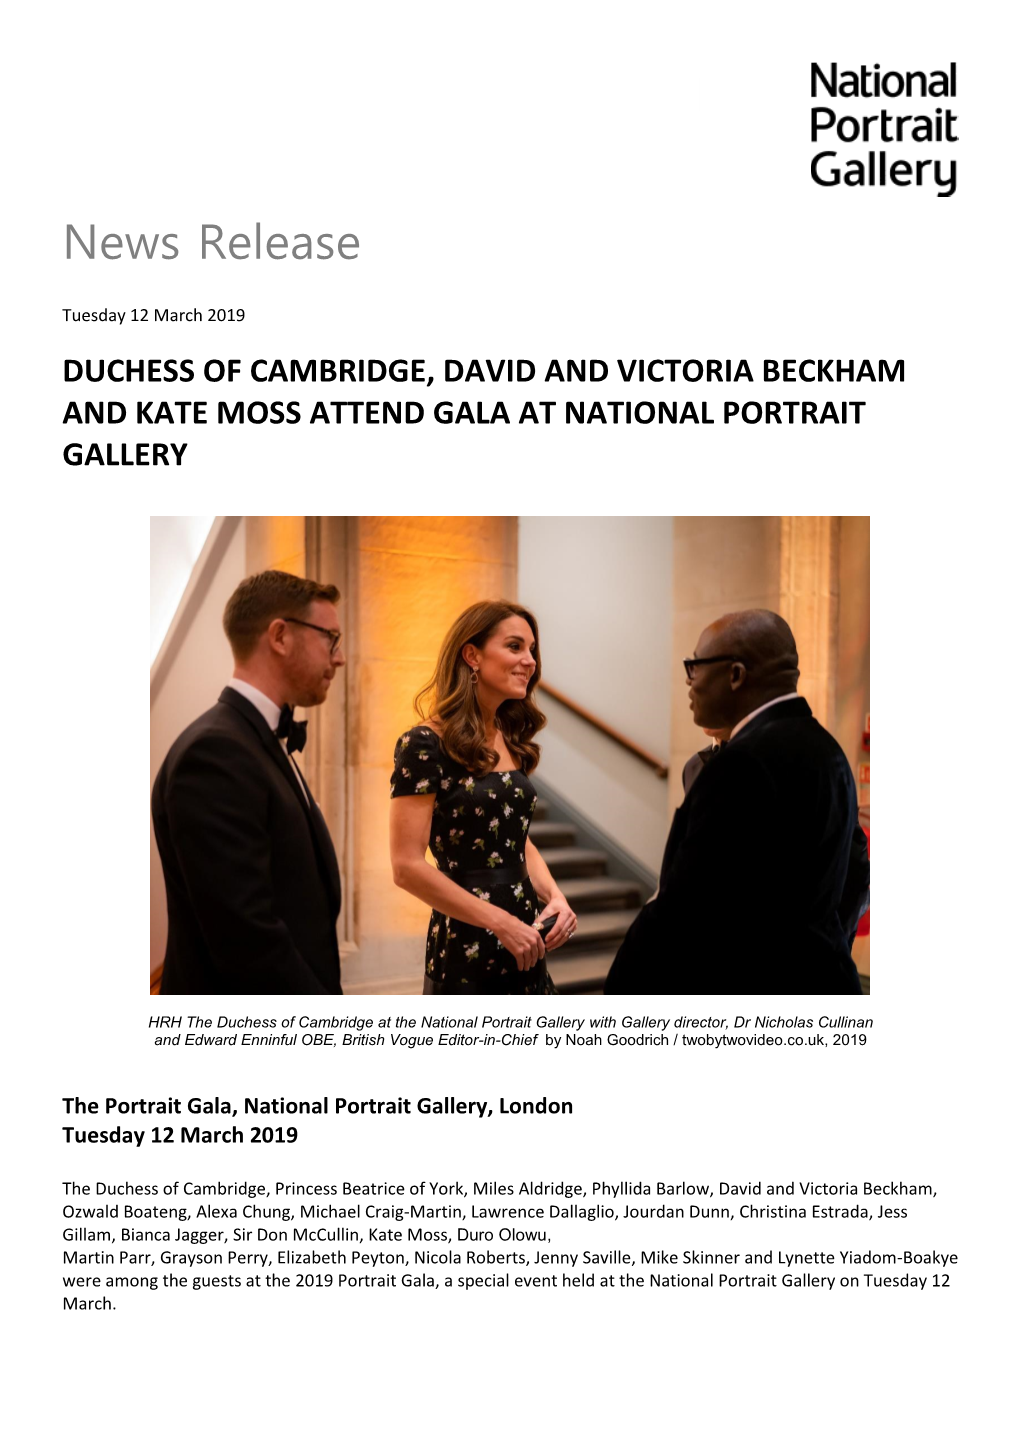 Duchess of Cambridge, David and Victoria Beckham and Kate Moss Attend Gala at National Portrait Gallery